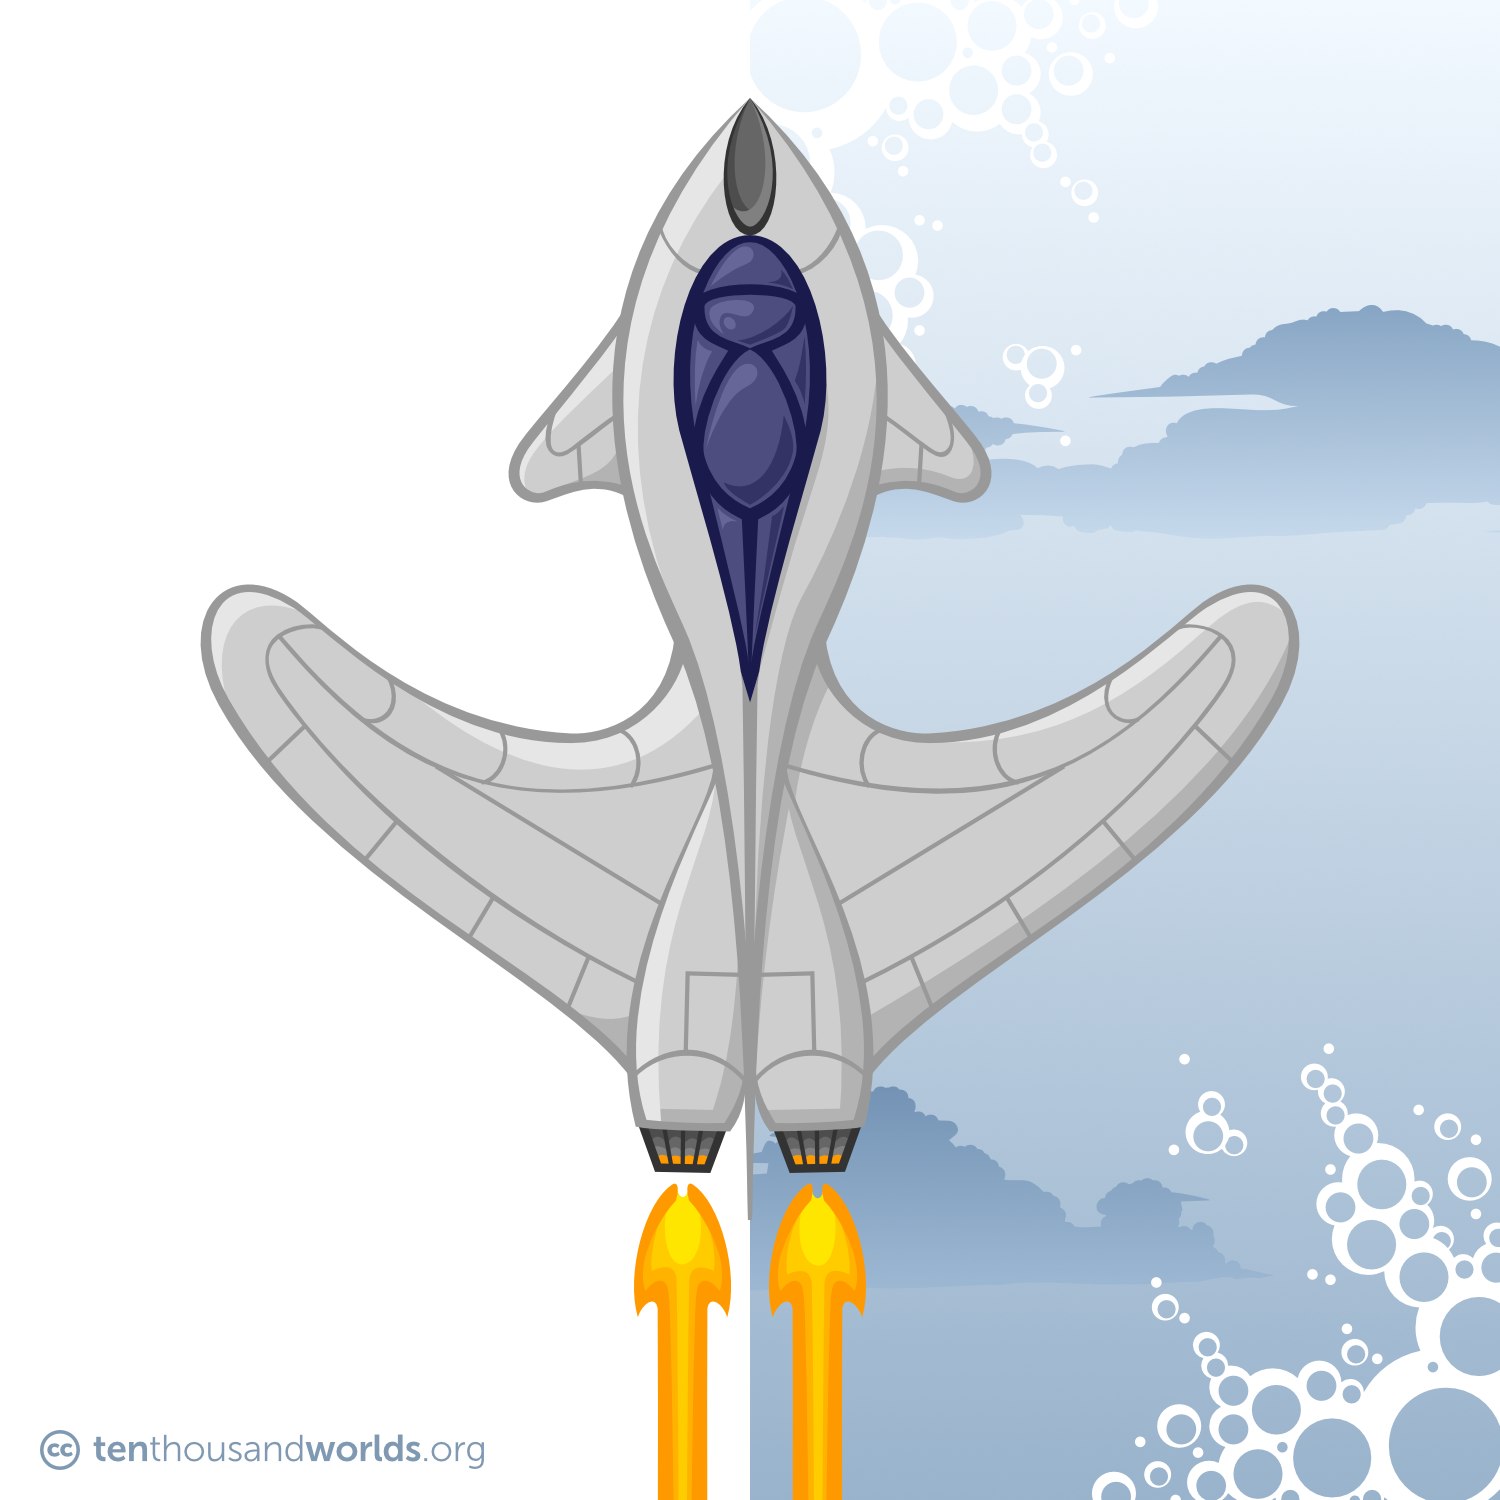 A fanciful silvery jet seen from above, all smooth curves and ellipses, with an almond-shaped cockpit in dark glass, canards, large forward-swept wings, and twin engines spitting orange fire.